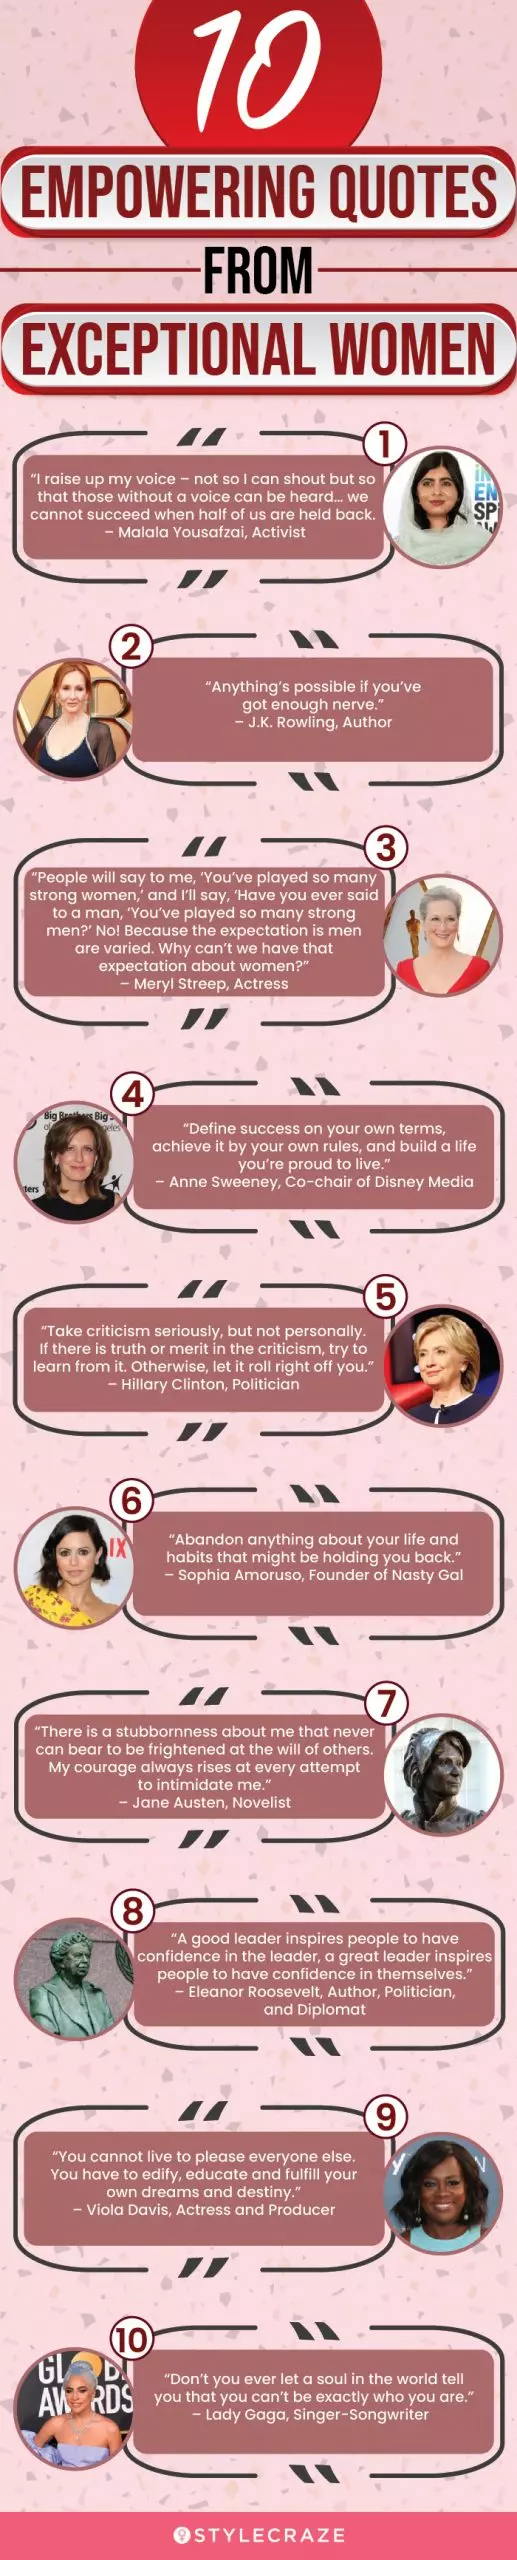 10 empowering quotes from exceptional women (infographic)